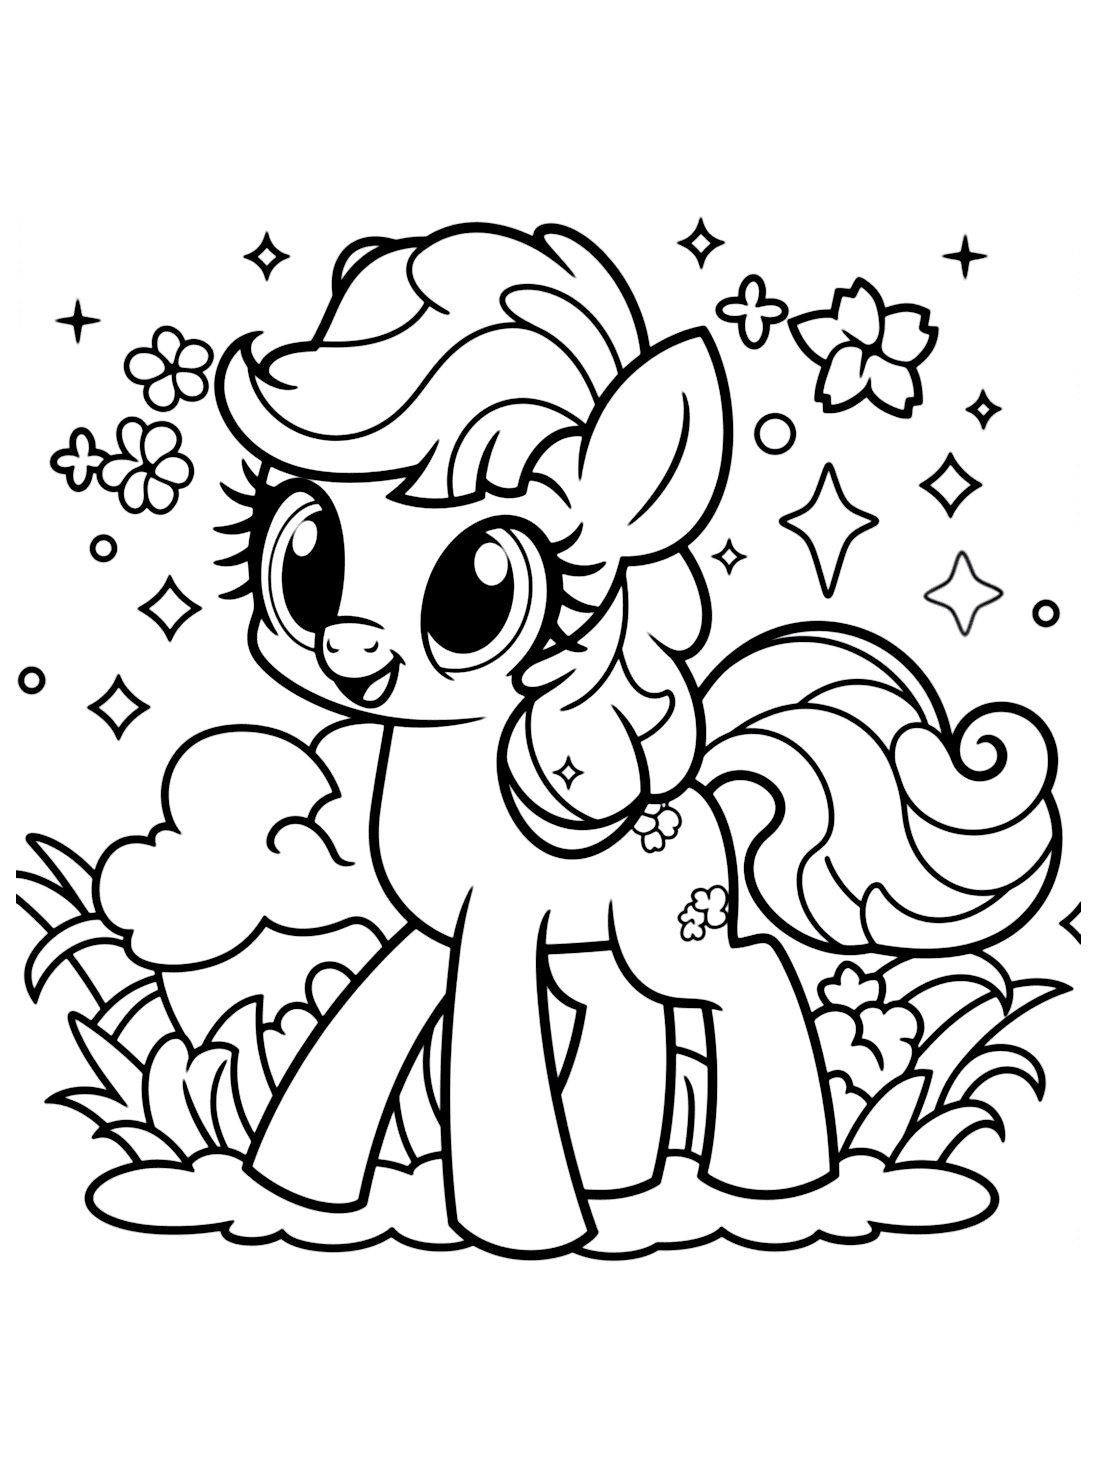 Rainbow Dash My Little Pony Coloring Pages